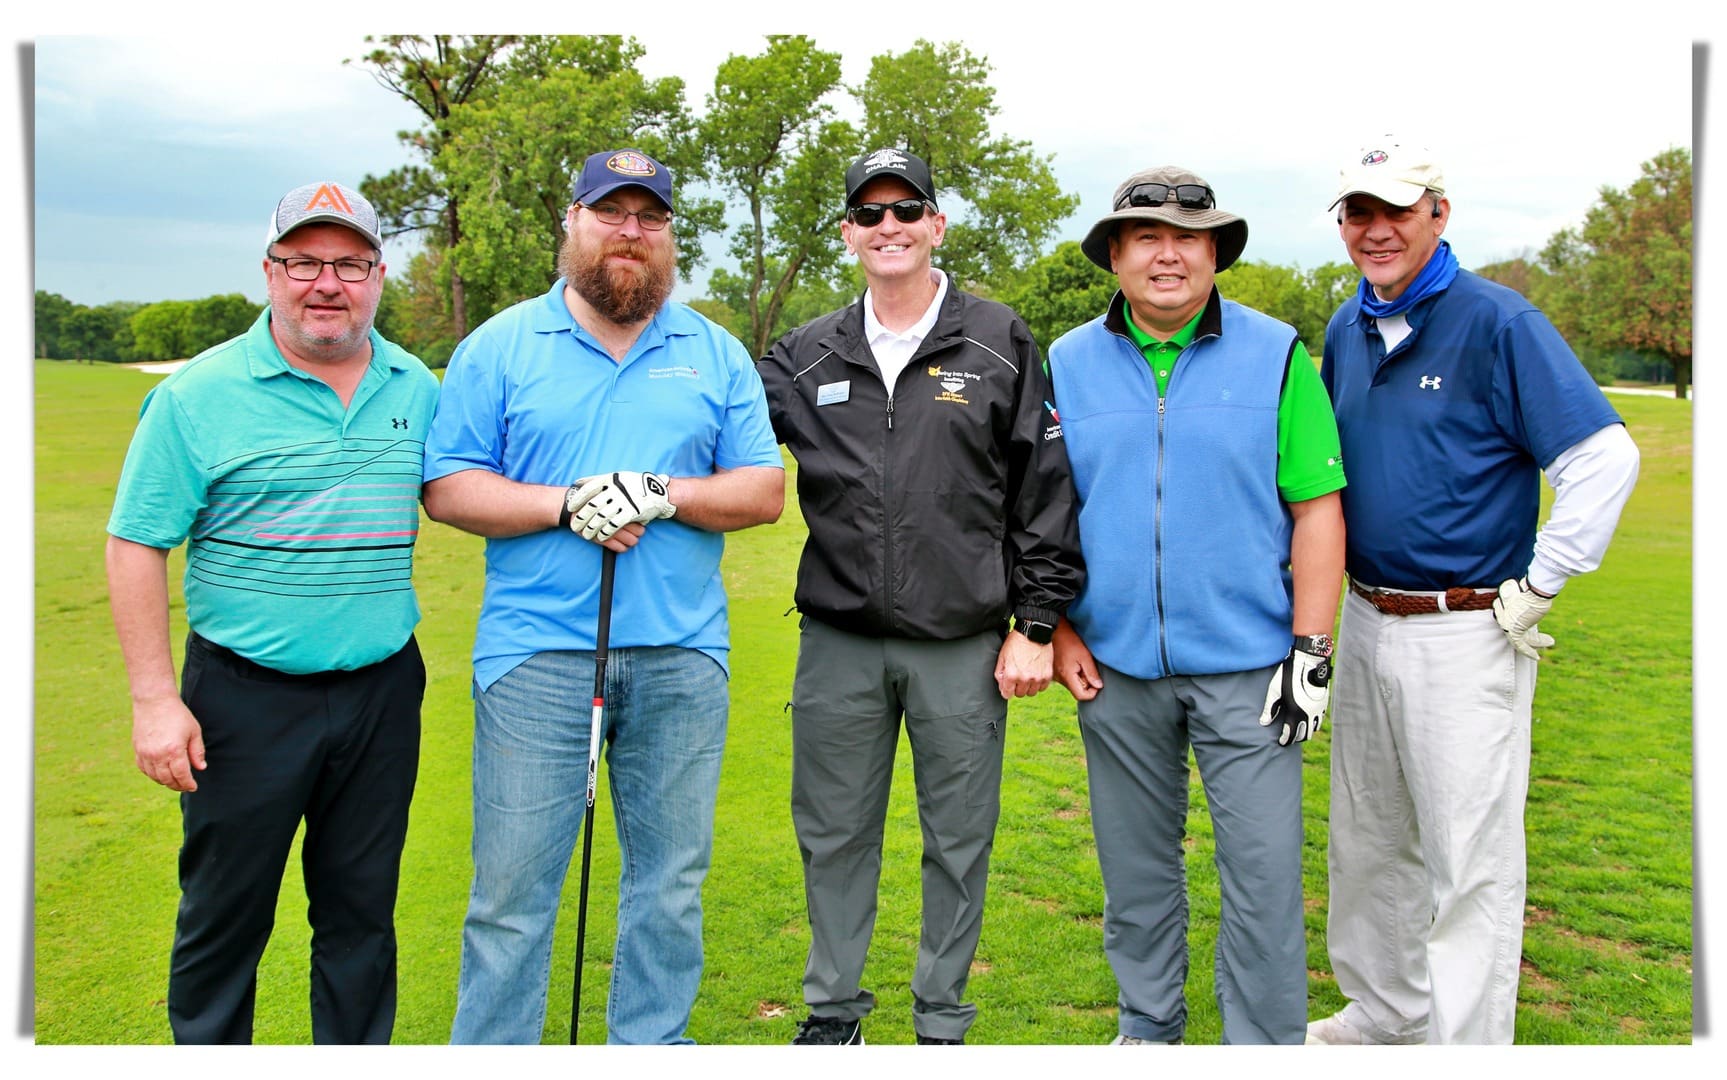 A group of men posing for a photo on a golf course.